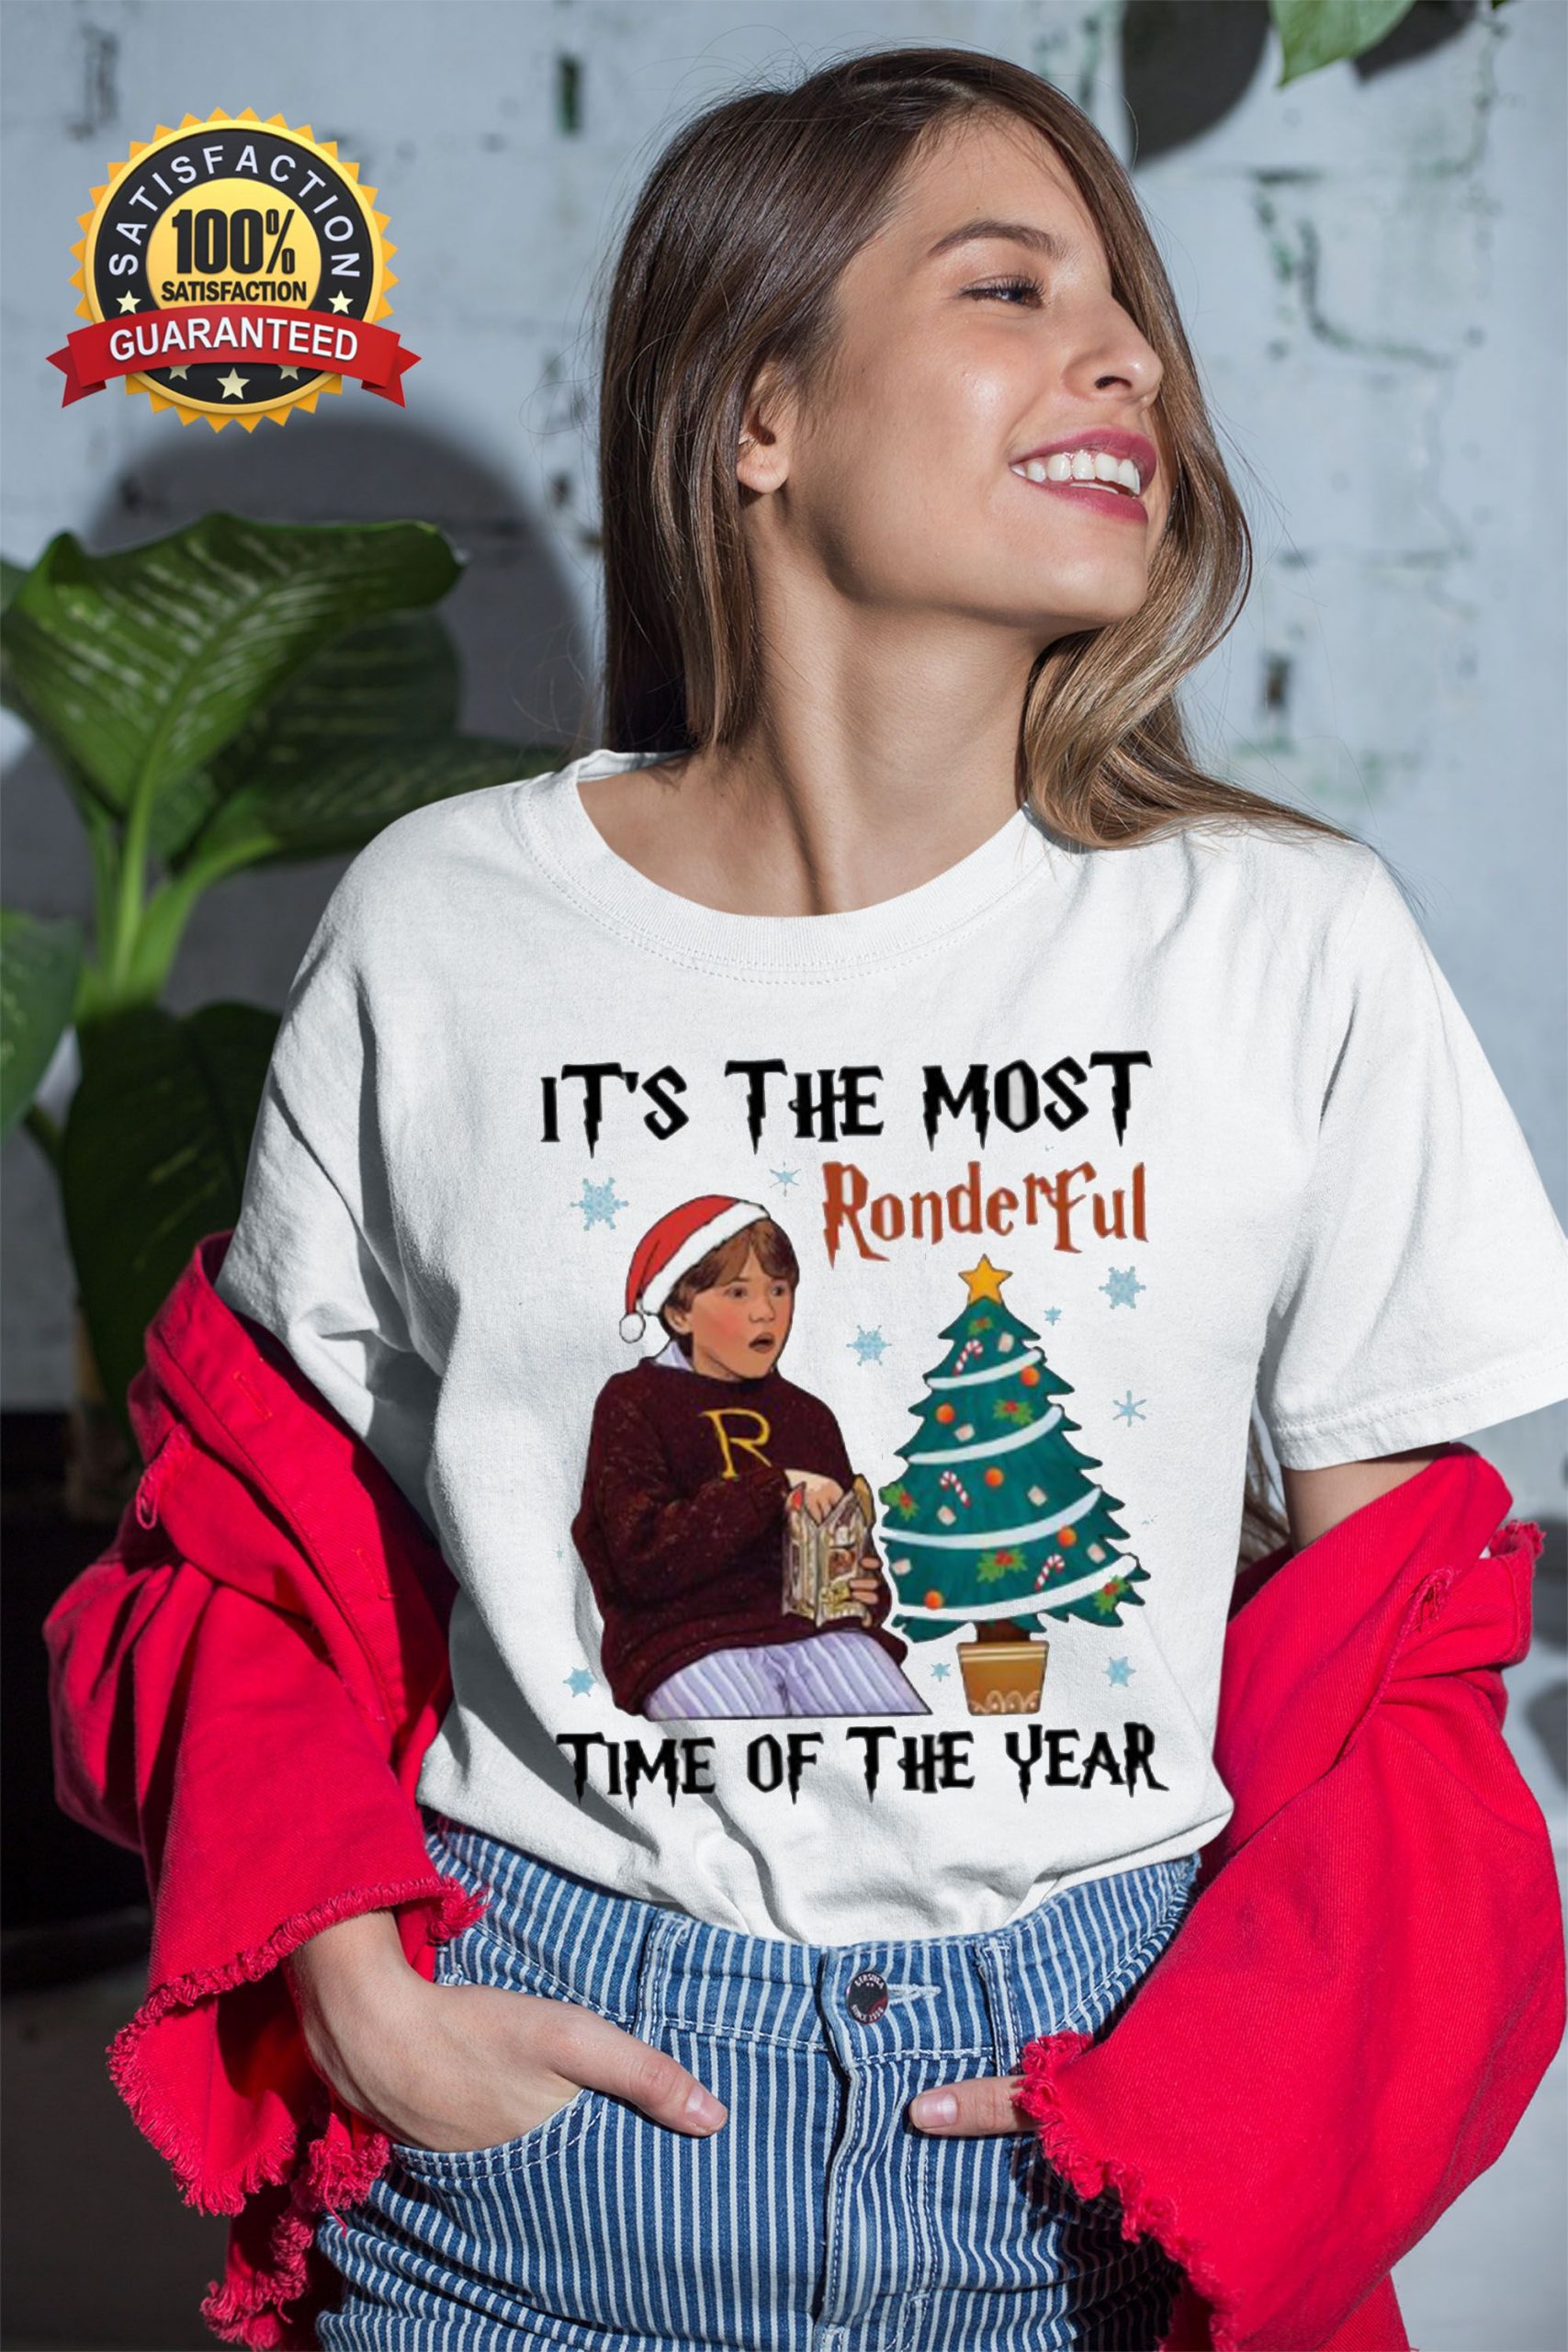 Nat Playful Bulk Ron Weasley Shirt, Harry Potter Movie, Santa Ron Weasley it's the most  Wonderful time of the year Christmas